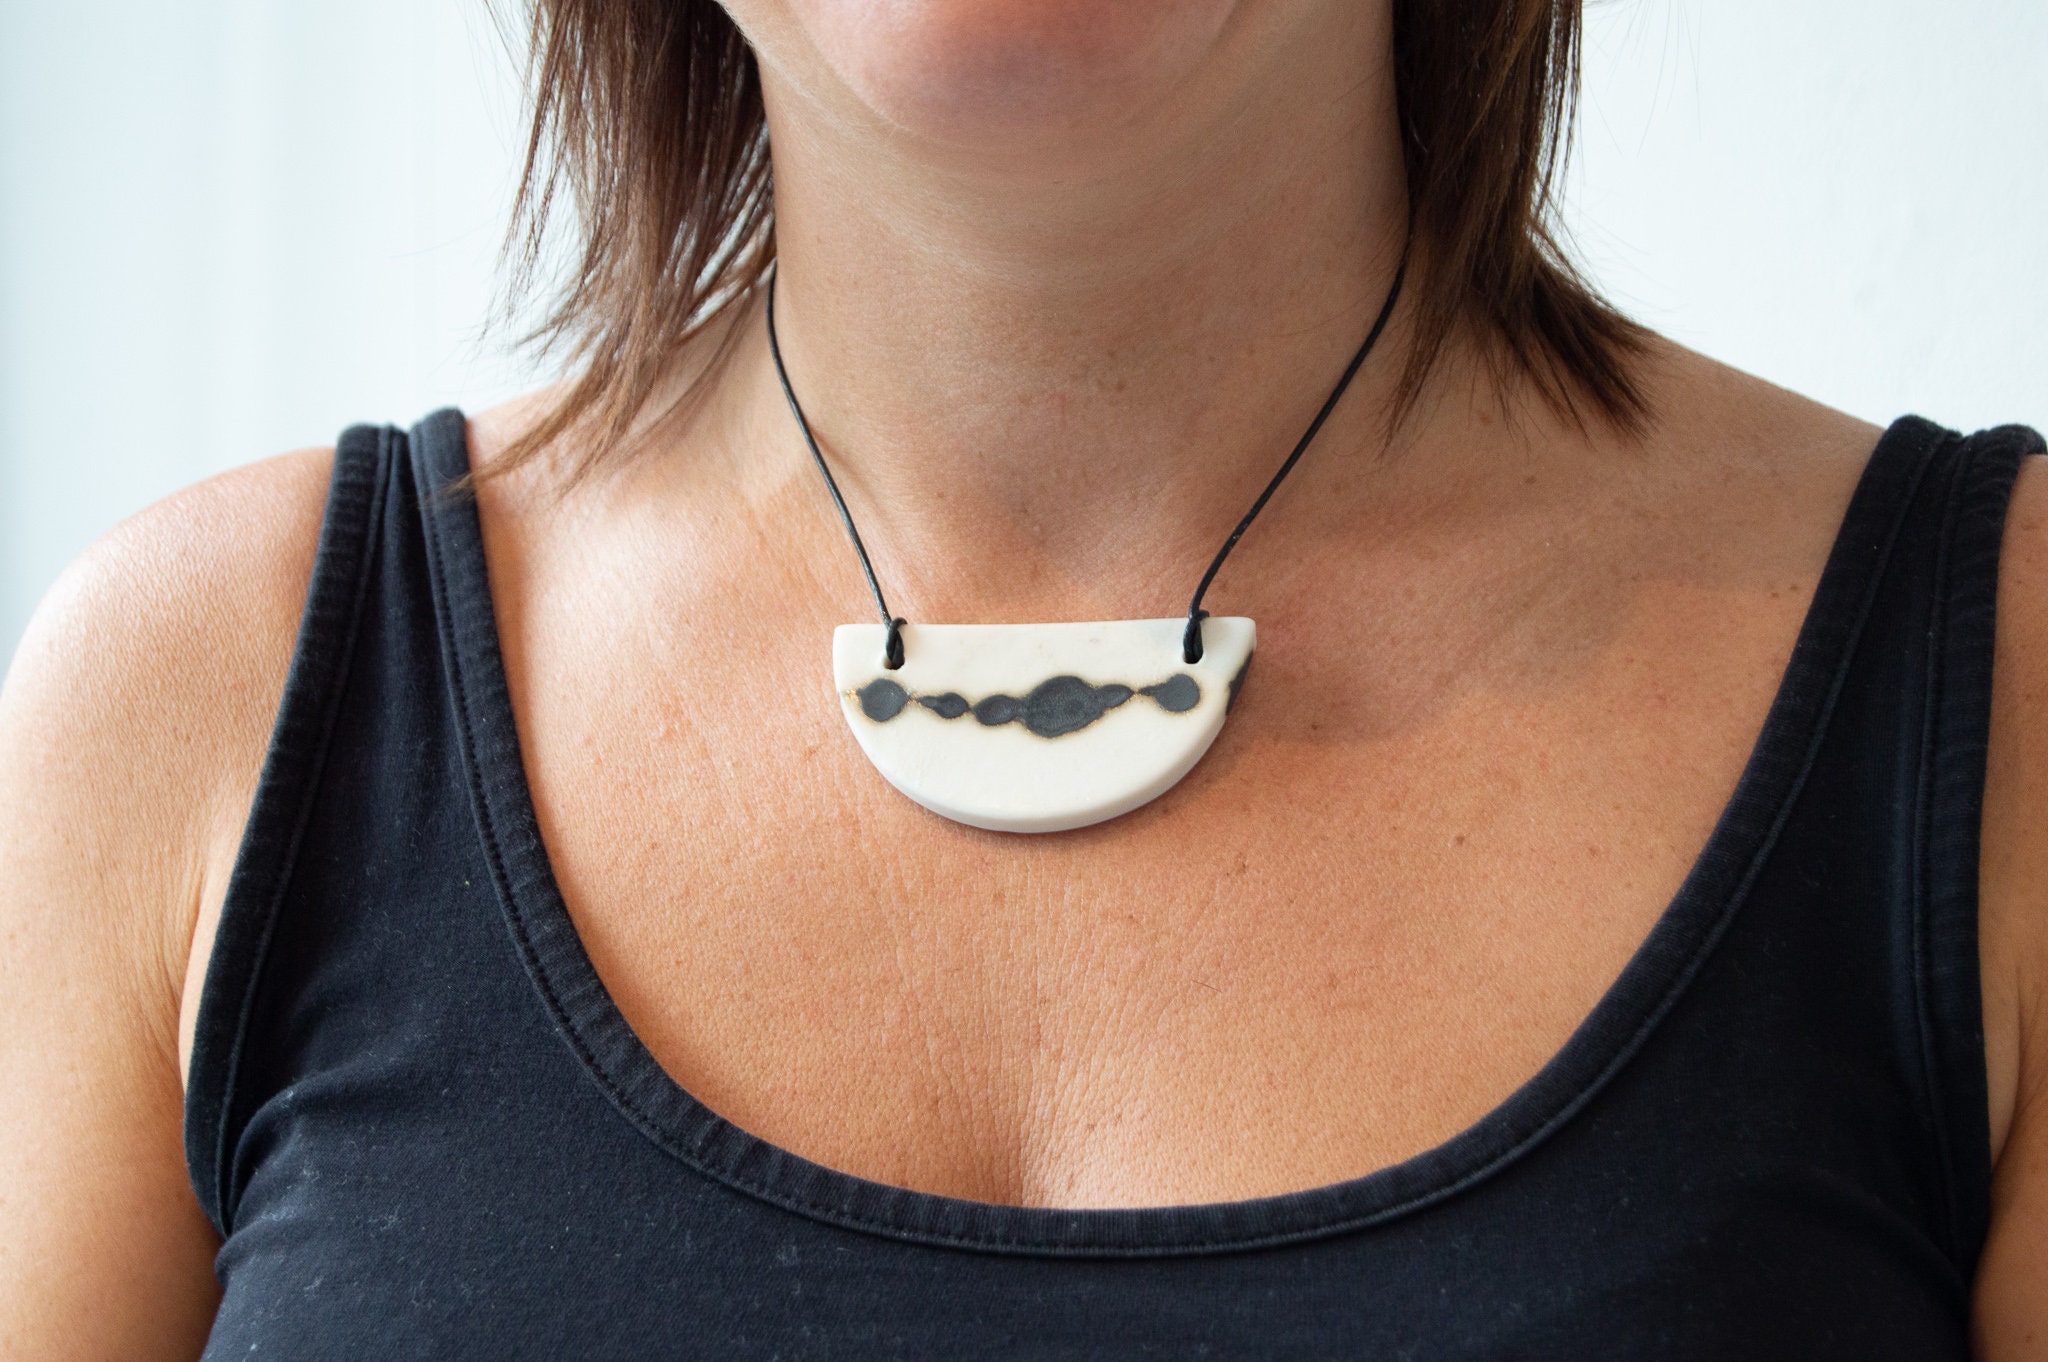 Black and White Porcelain Choker - Limited Editions